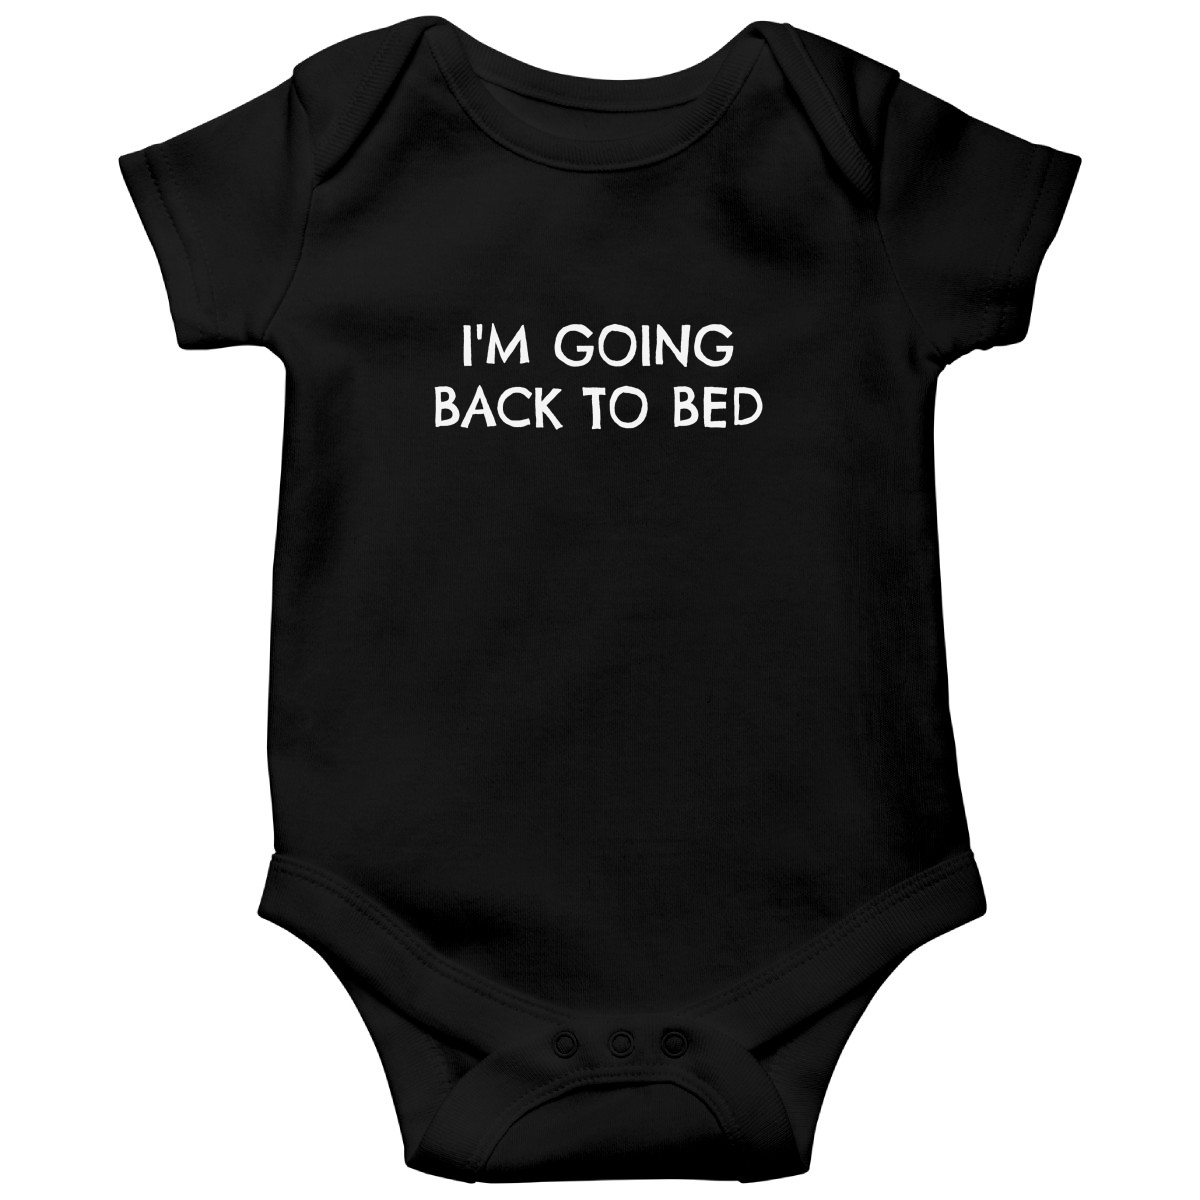 I'm Going Back to Bed Baby Bodysuits | Black